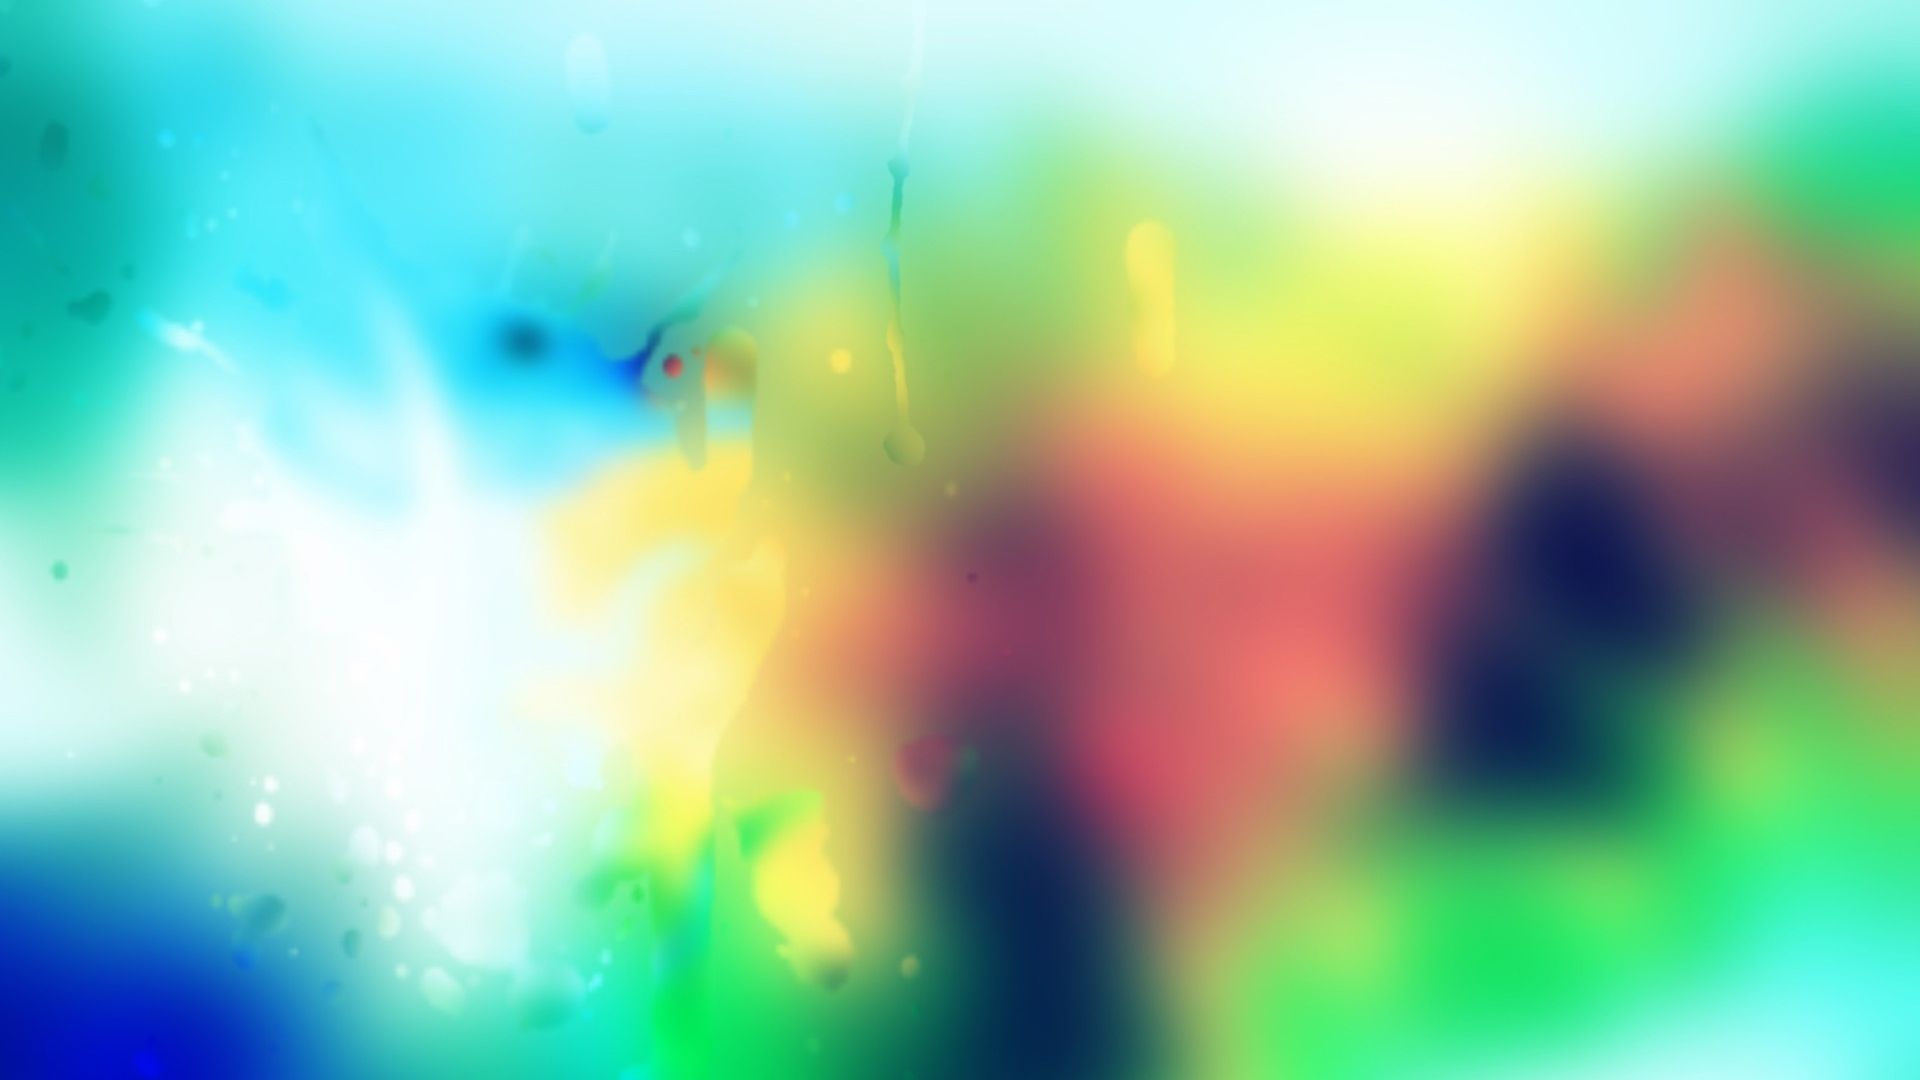 Download Wallpaper 1920x1080 Drops, Blur, Color, Stains Full HD ...